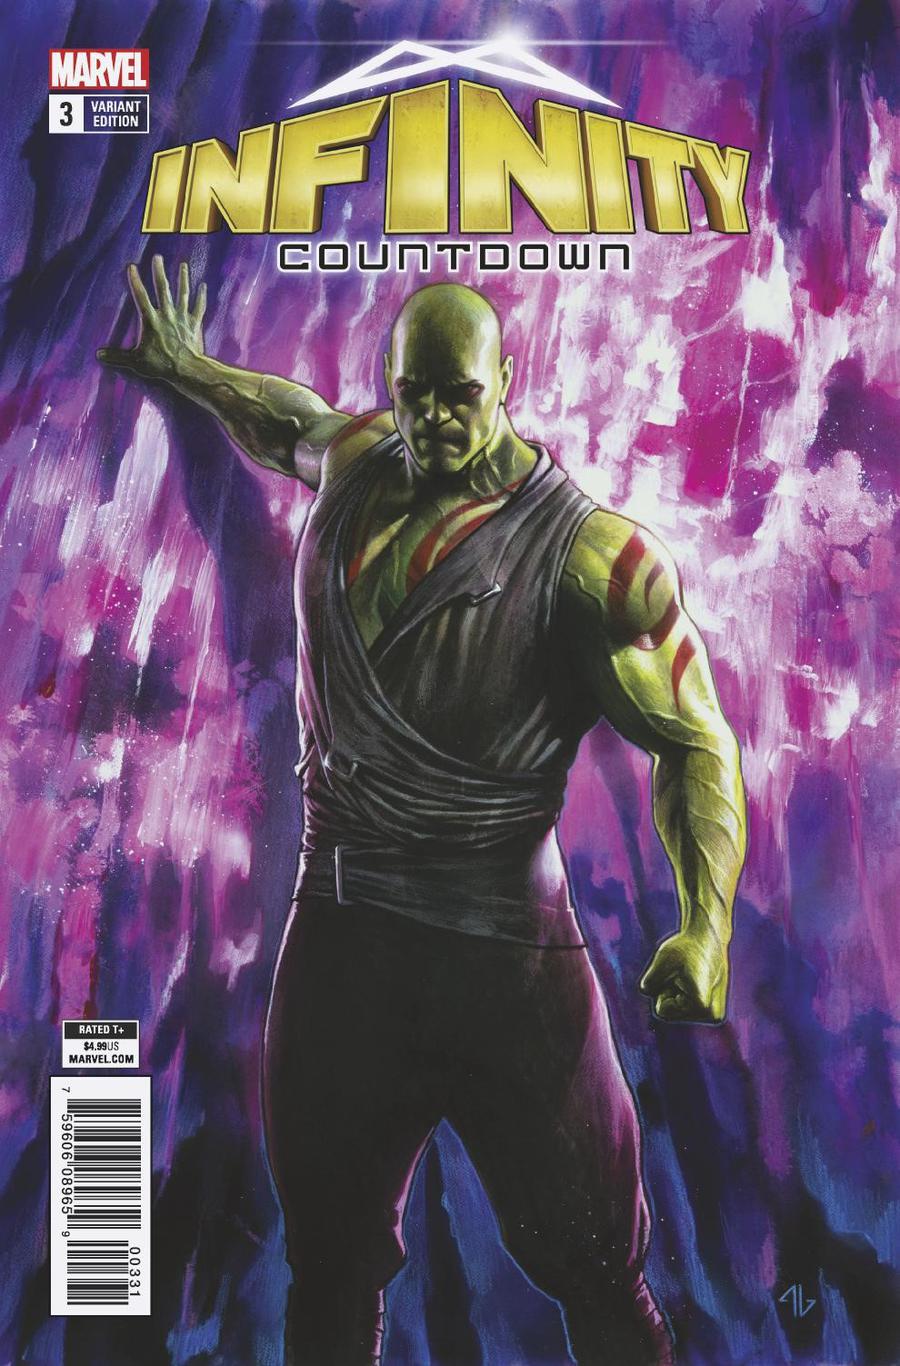 Infinity Countdown #3 (of 5) Variant Edition (Granov) [2018]